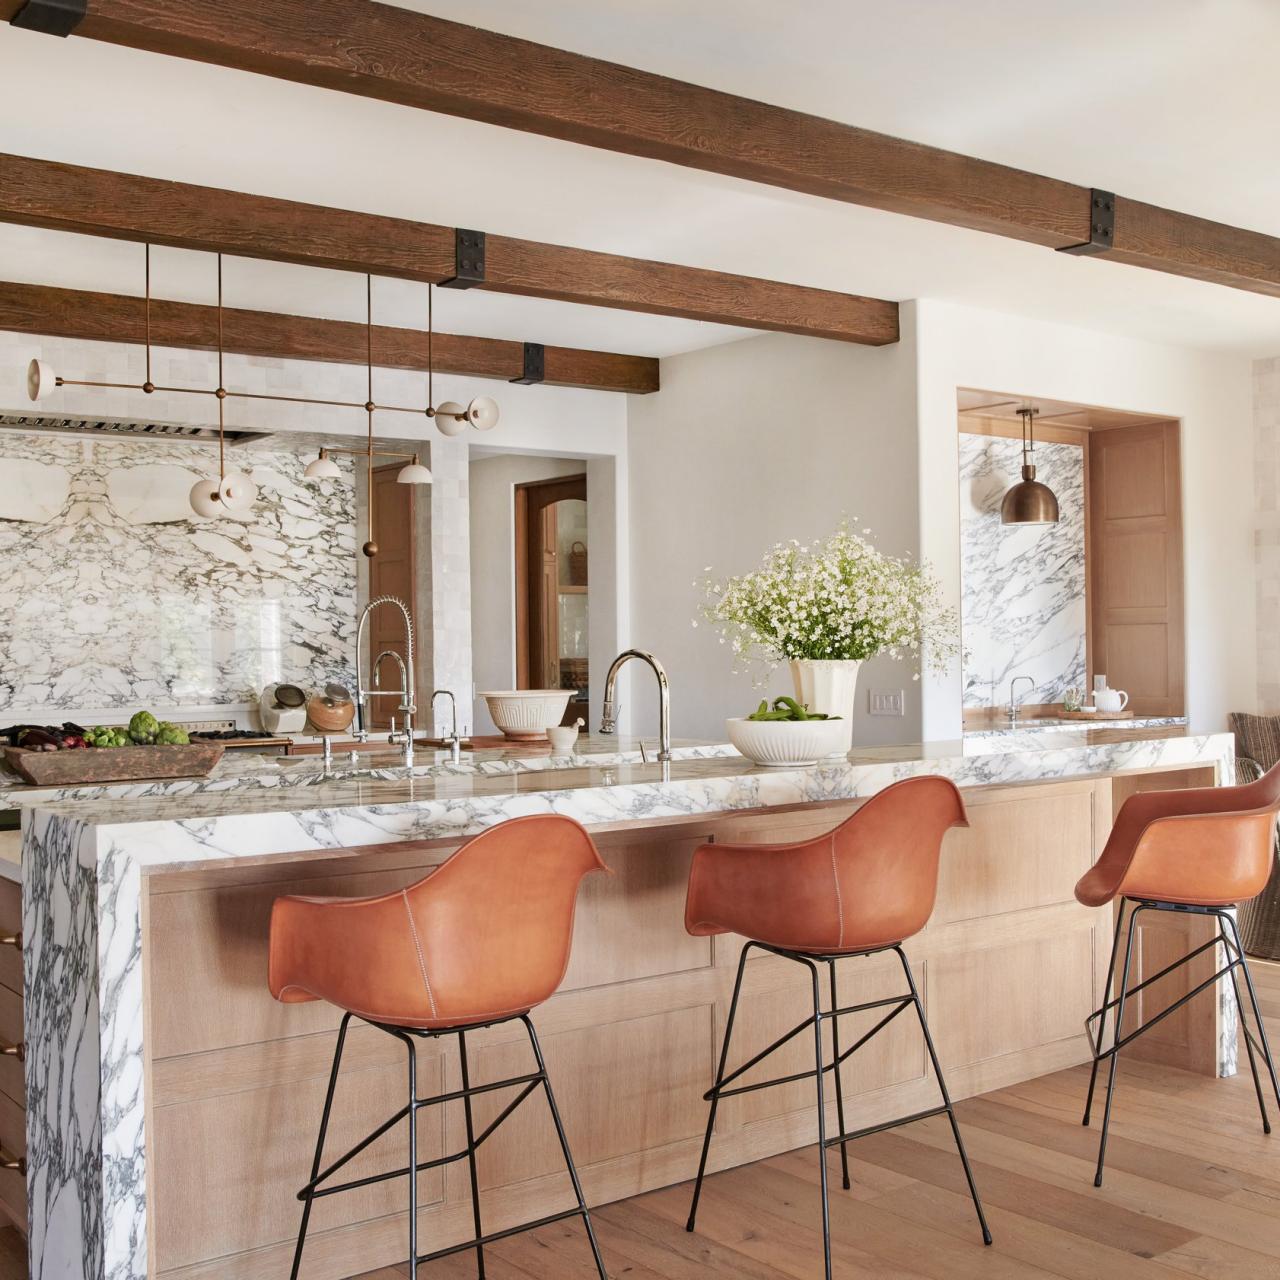 6 Things The World's Most Beautiful Kitchens Have In Common